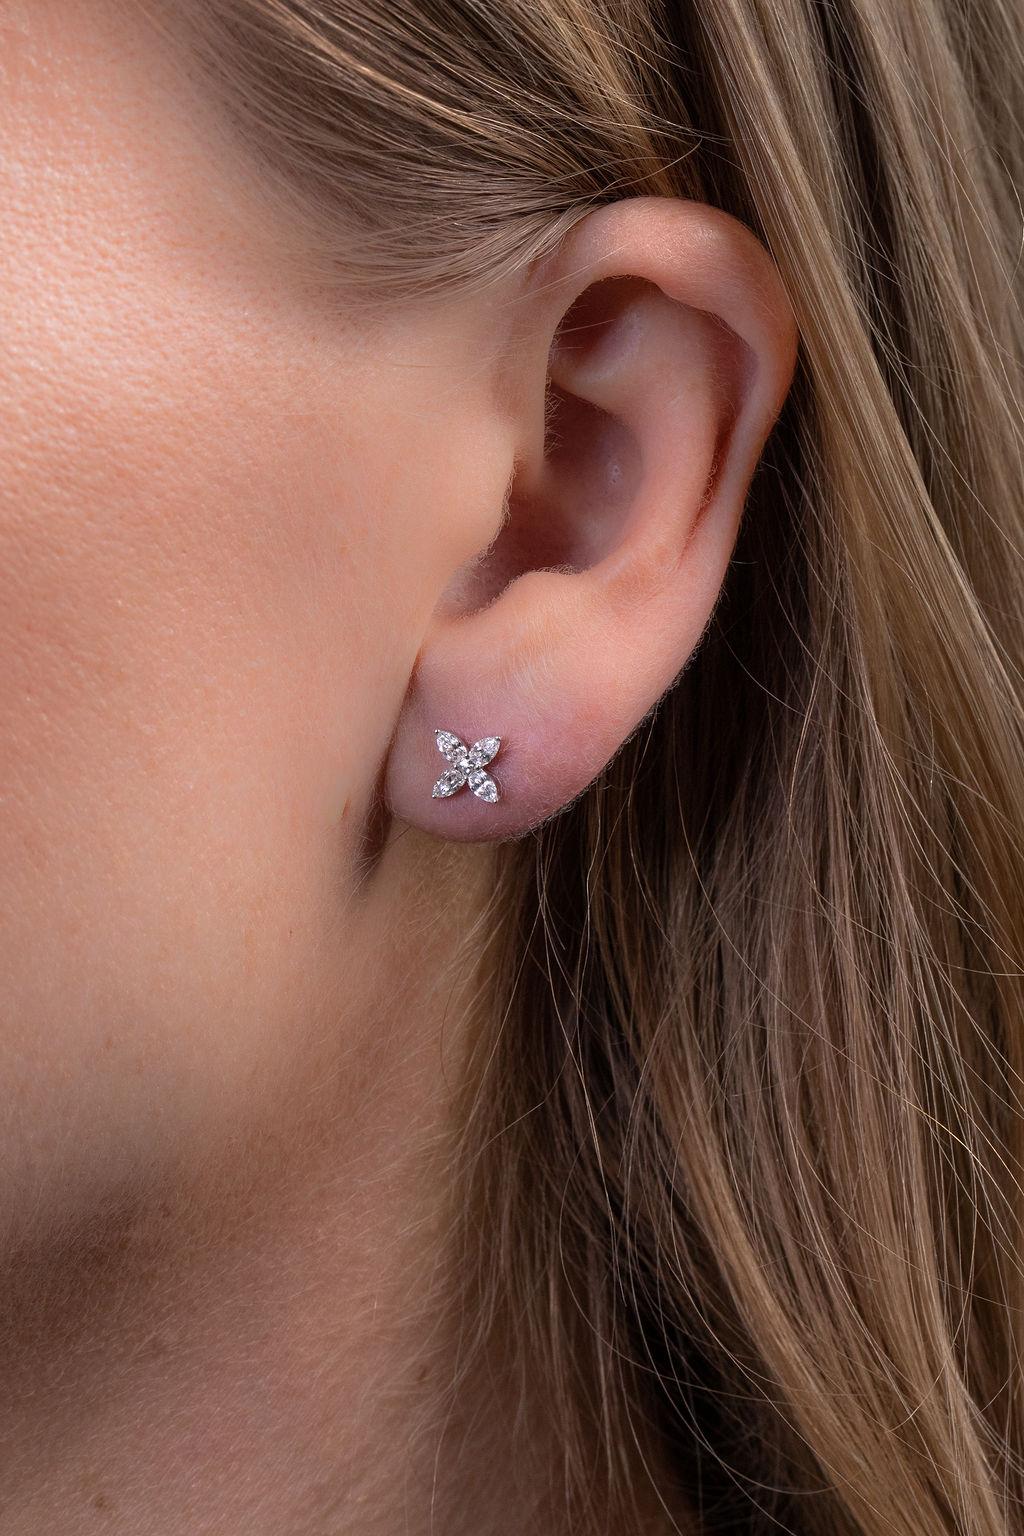 These elegant diamond flower studs are all about sparkle.  These versatile earrings transition beautifully from day to night.  Created in 18k white gold.

(Approx. 0.85 tcw)